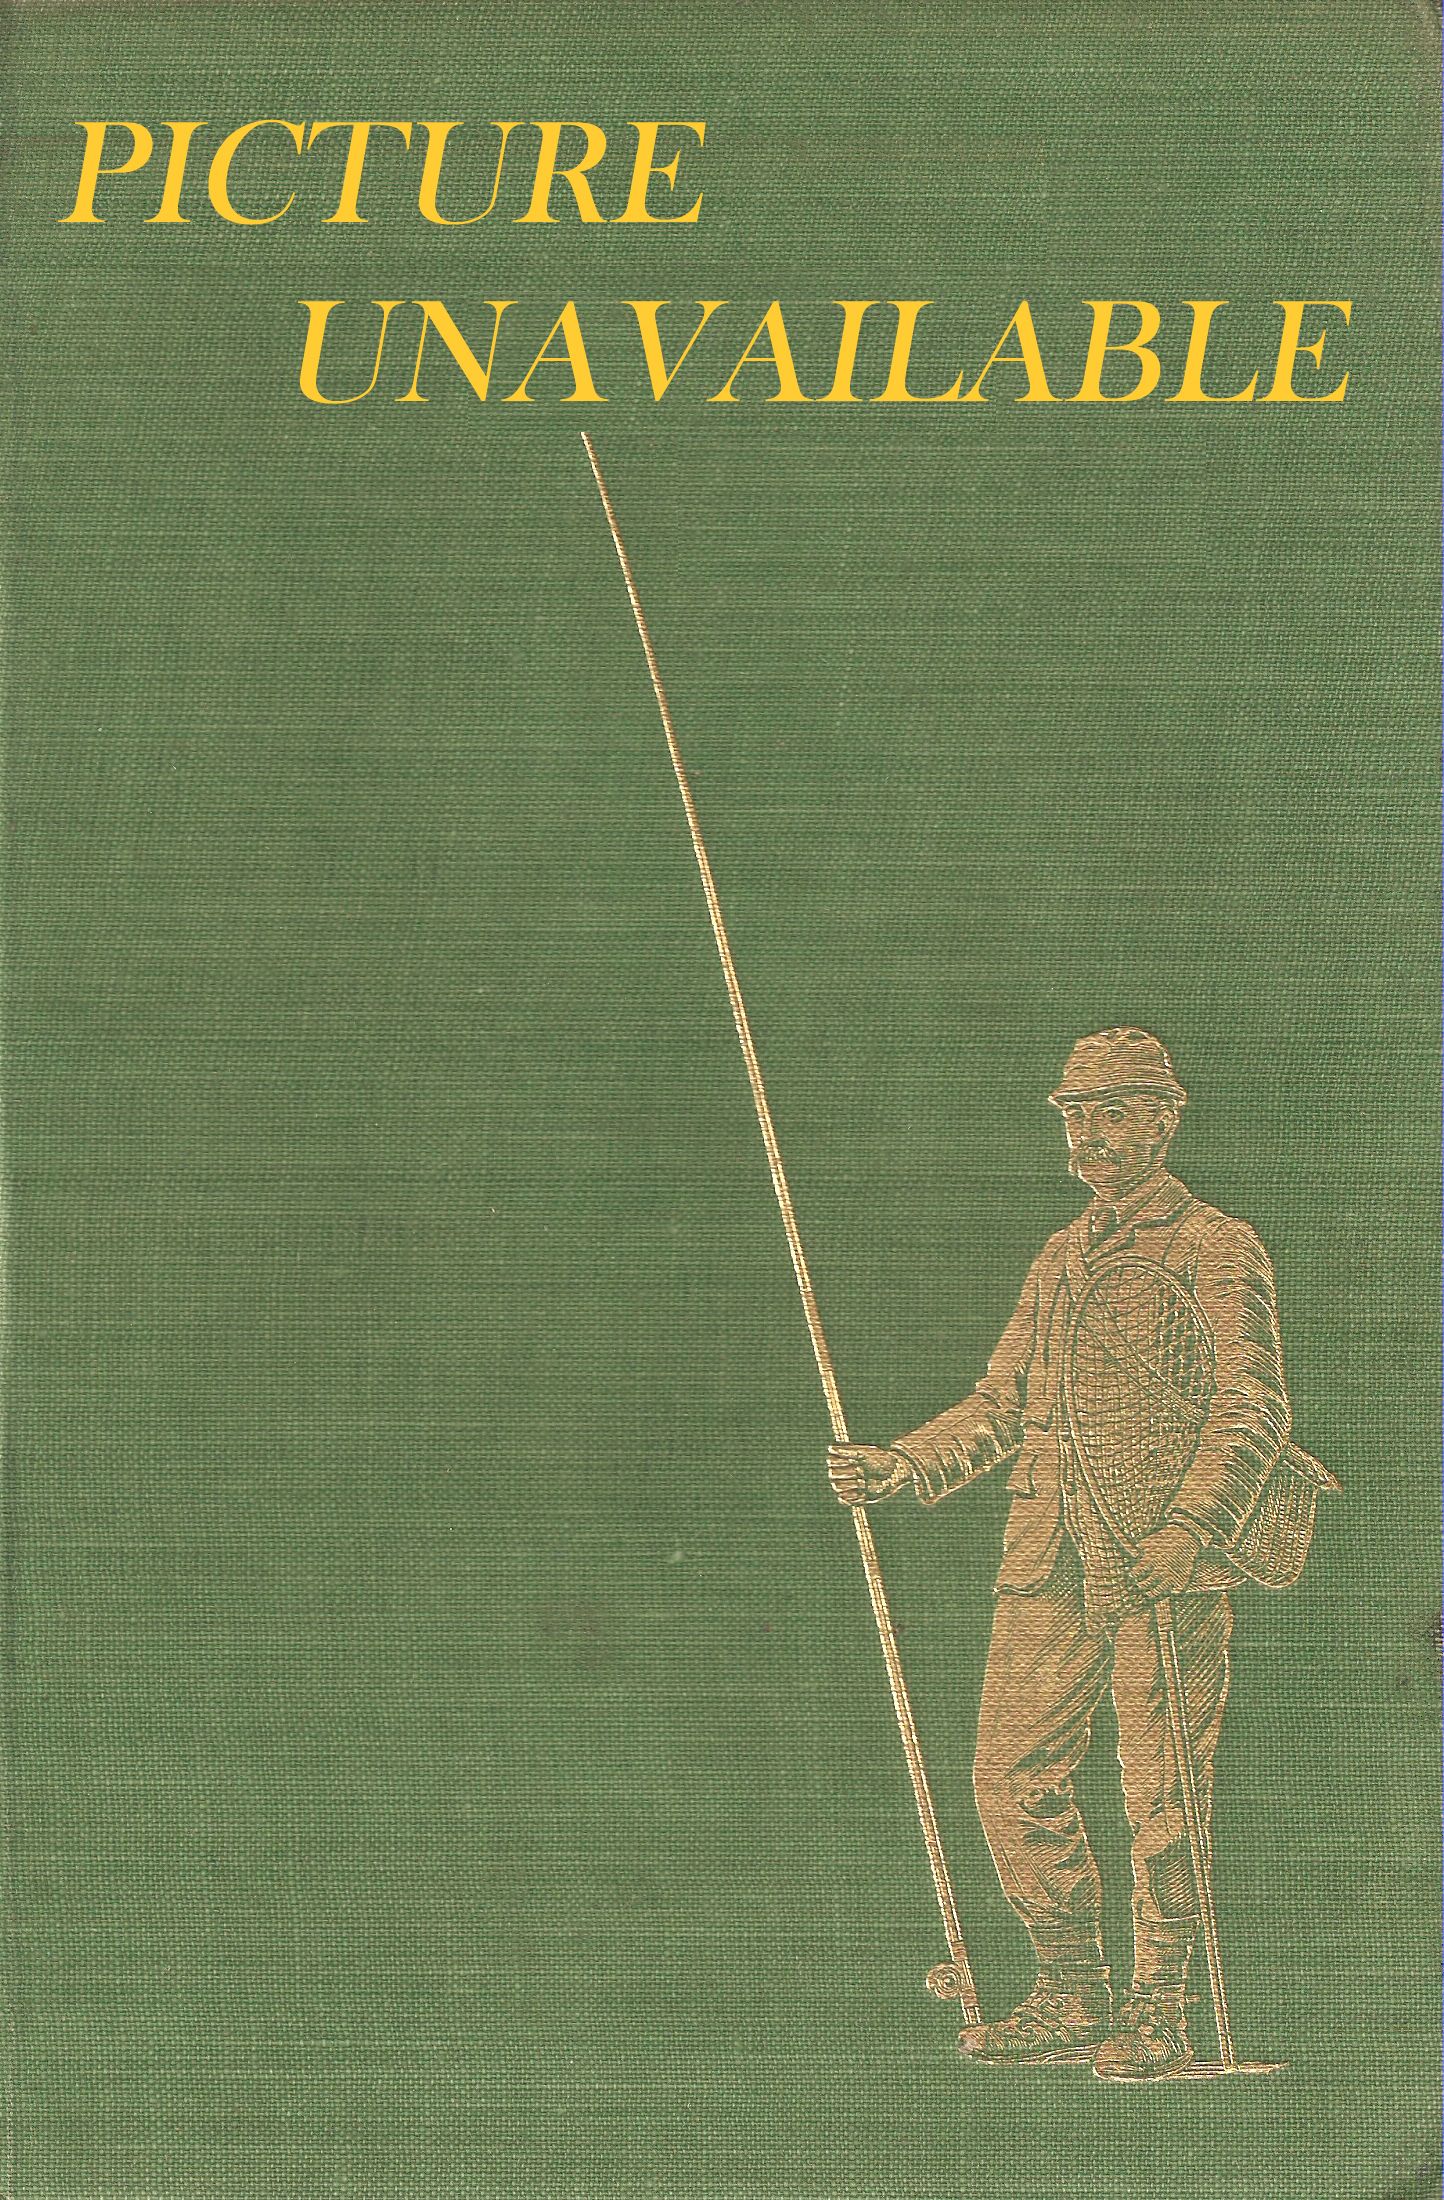 THE COMPLETE FLY FISHERMAN: THE NOTES AND LETTERS OF THEODORE GORDON.  Edited with an introduction by John McDonald.